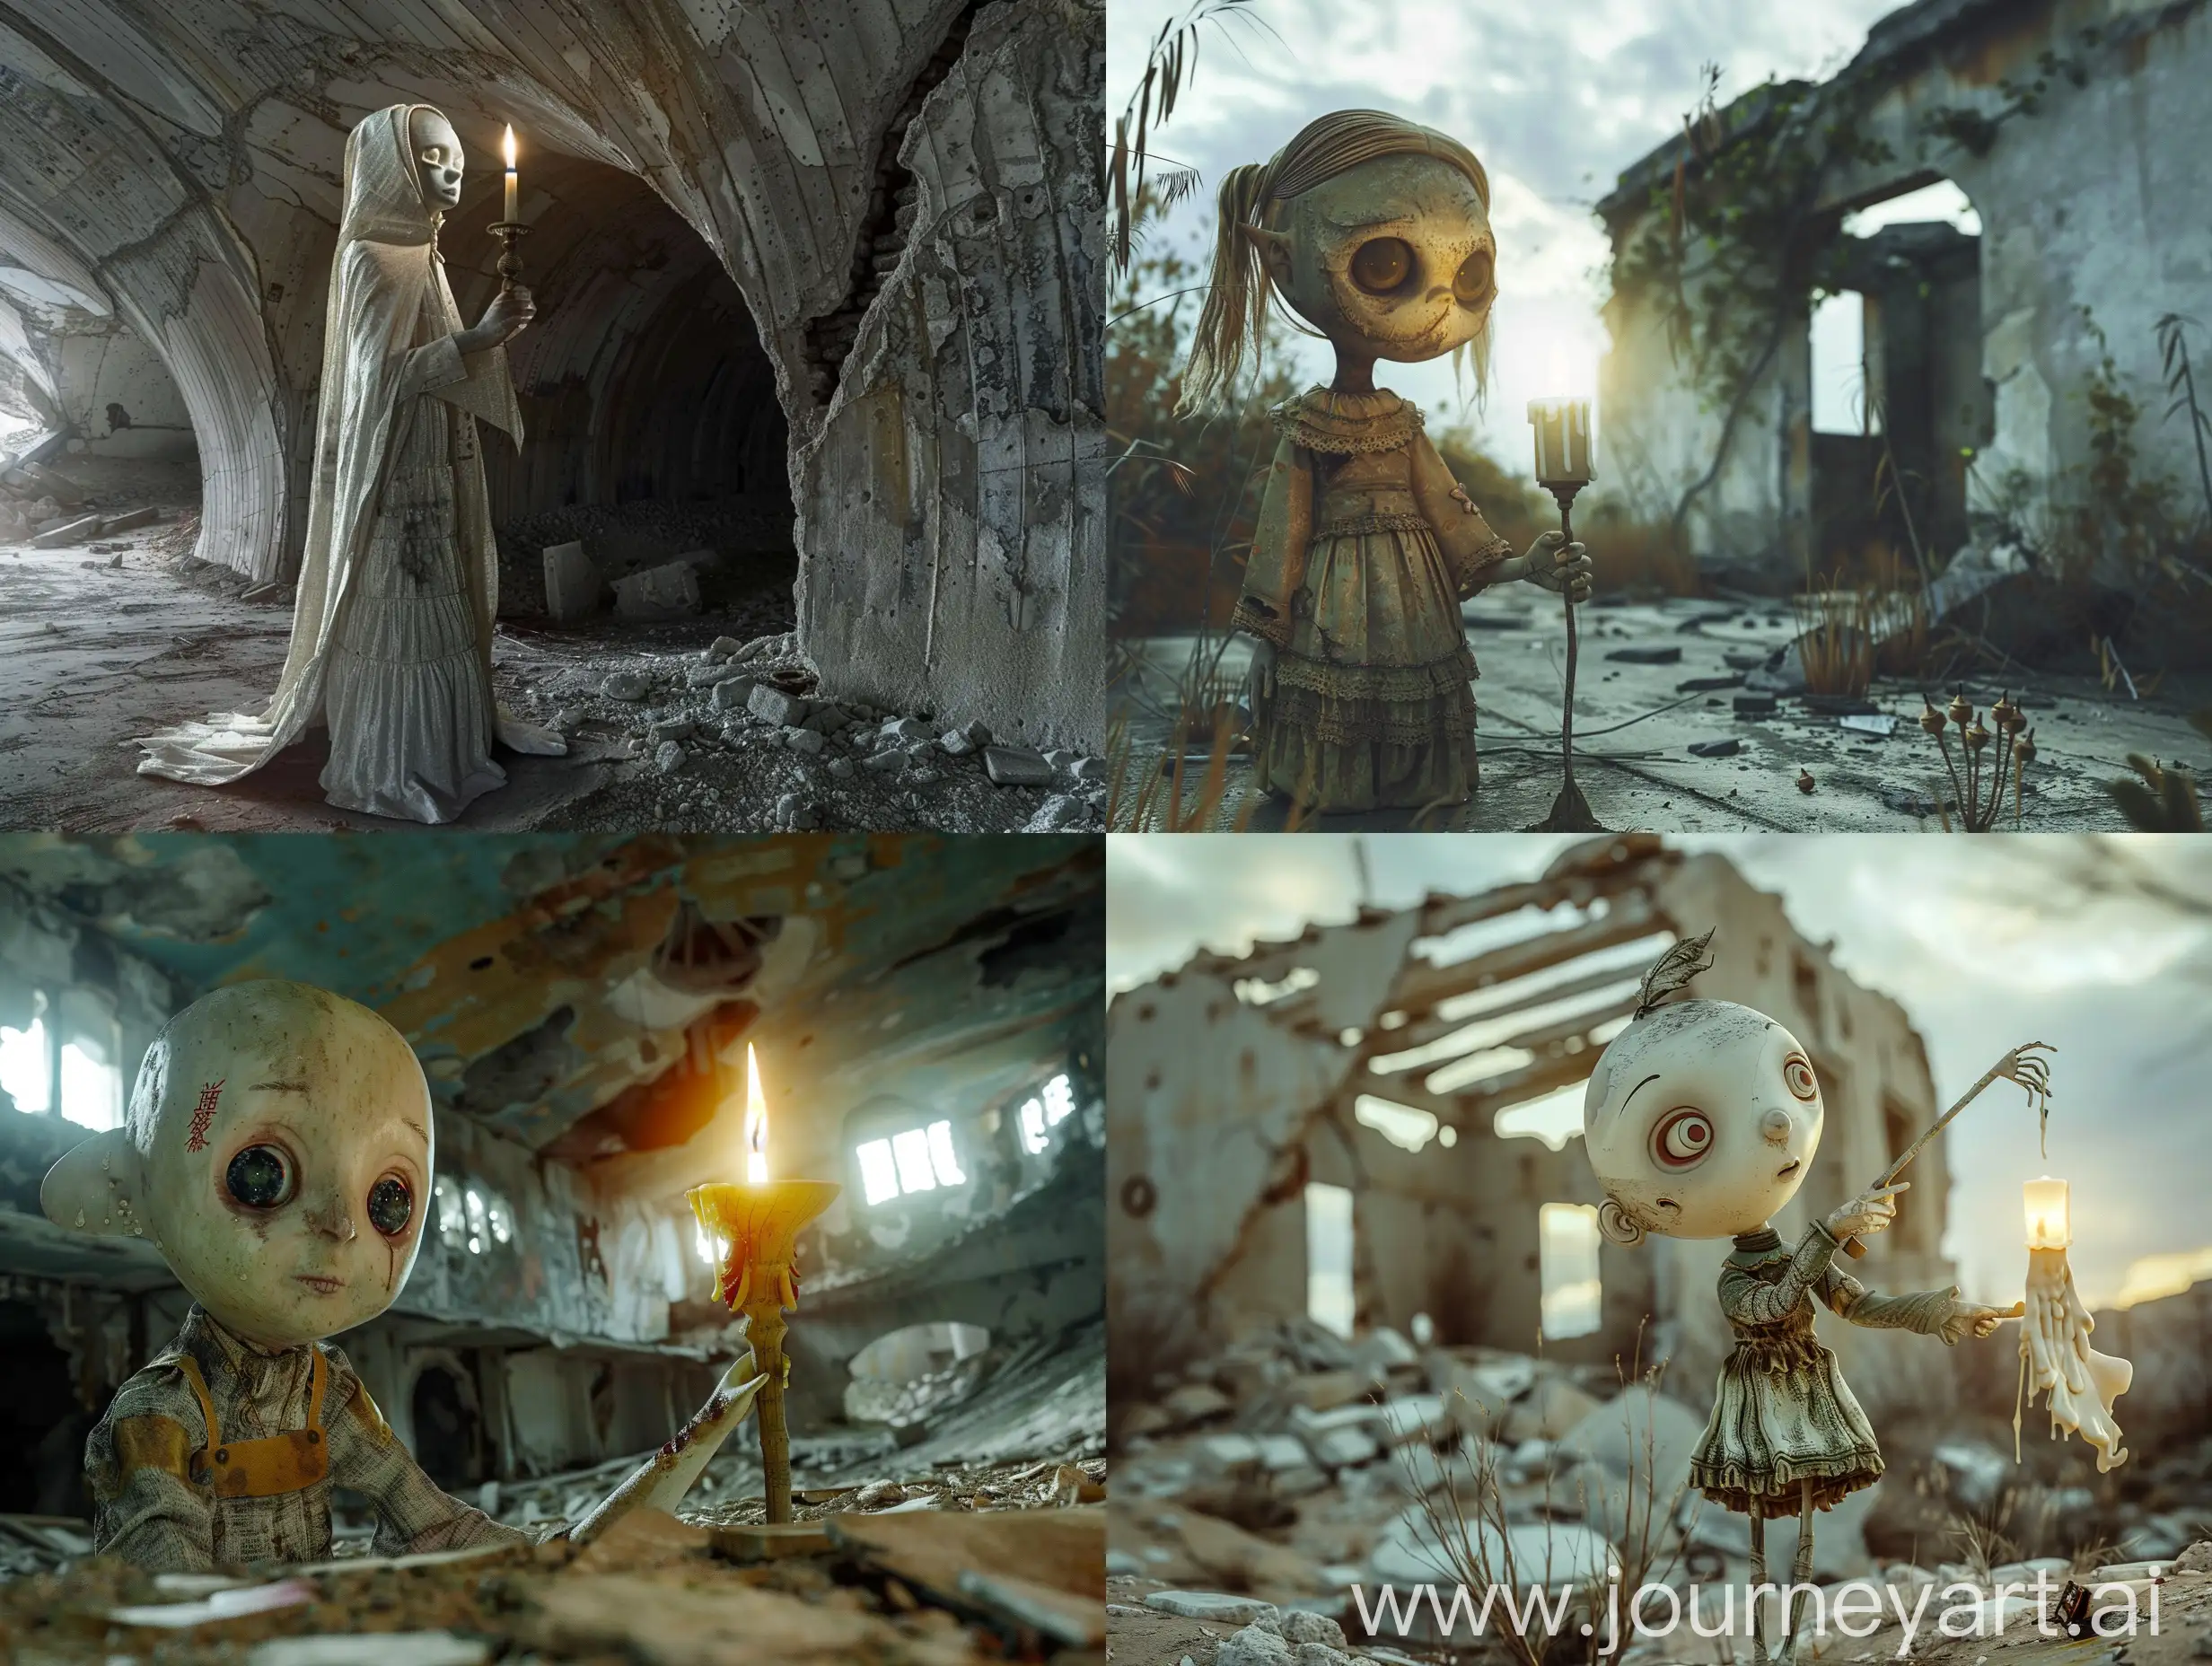 Mysterious-Yokai-Holding-Candlestick-in-Abandoned-Shelter